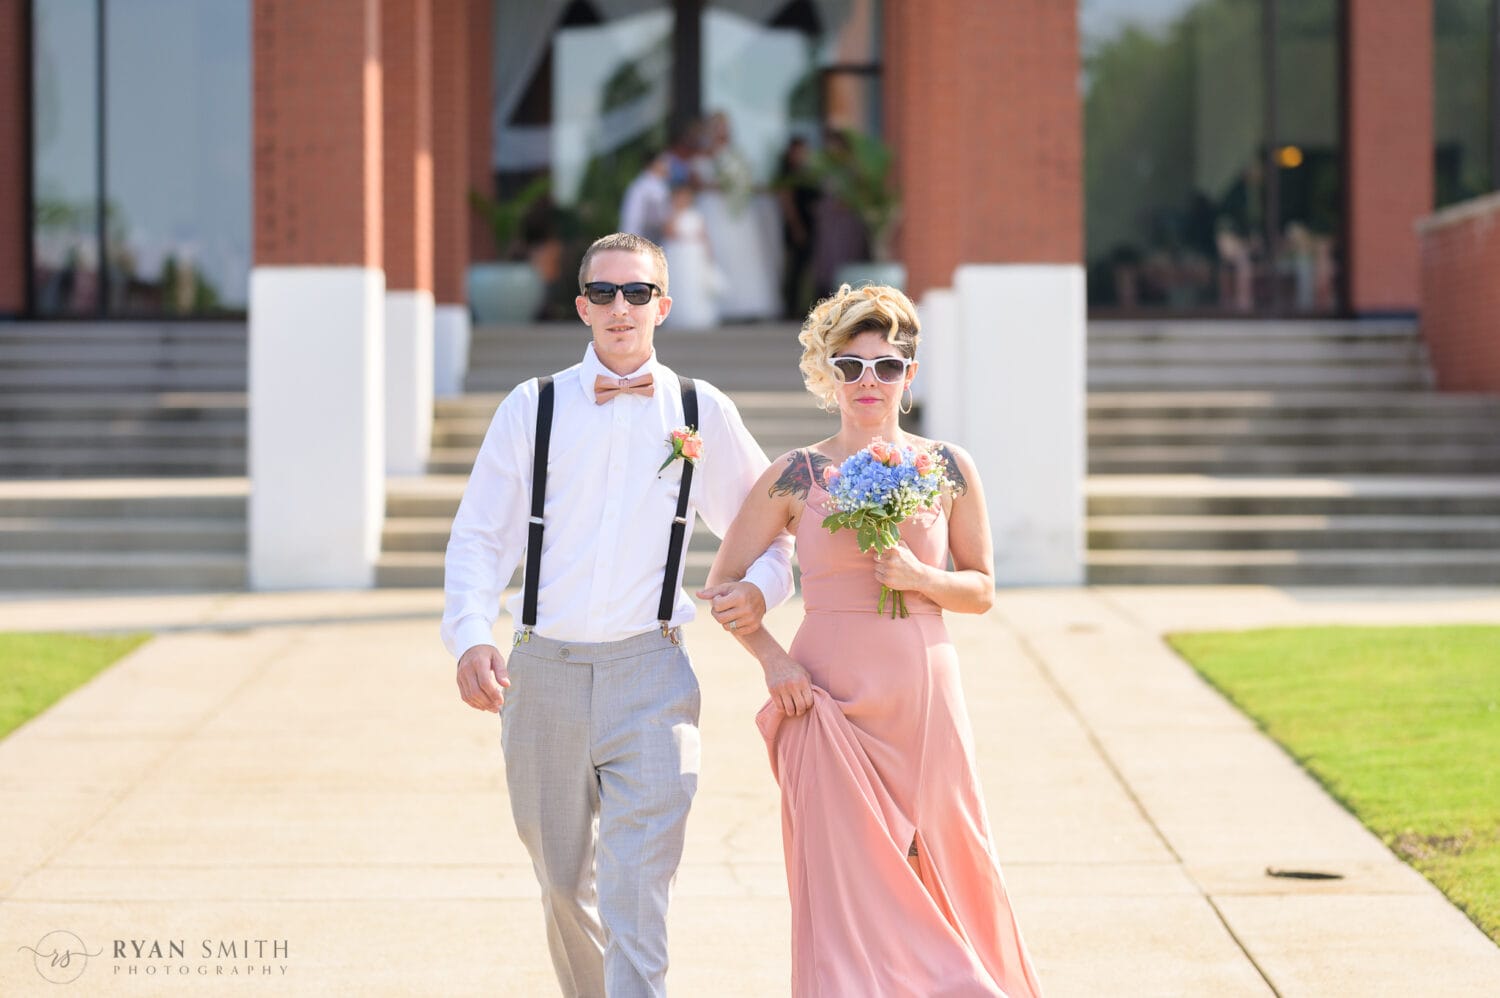 Bridesmaids and groomsmen walking to the ceremony - Wild Wing Plantation